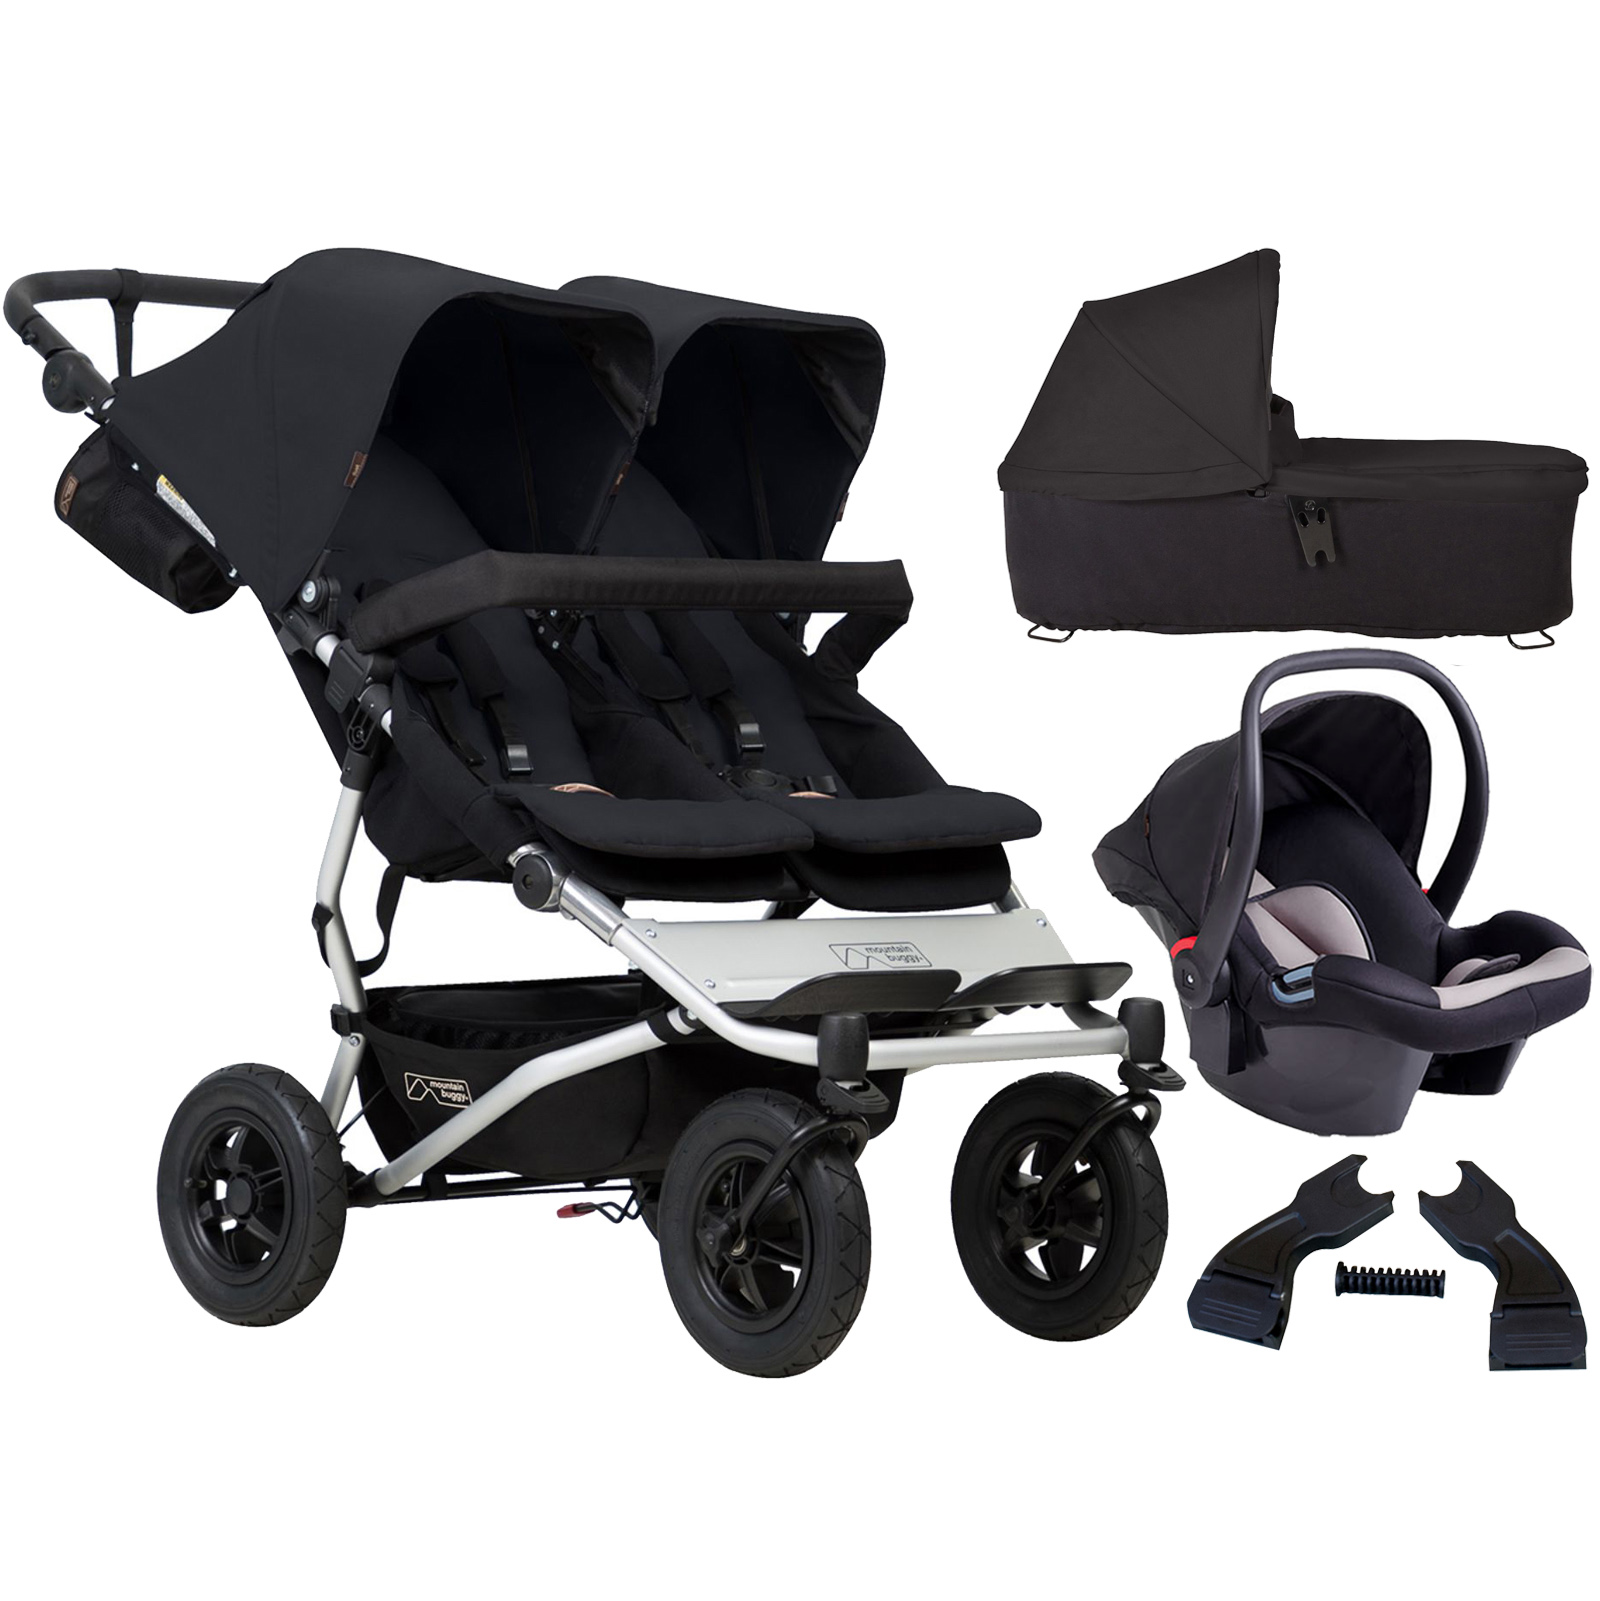 Mountain Buggy Duet V3 Travel System & Carrycot - Black